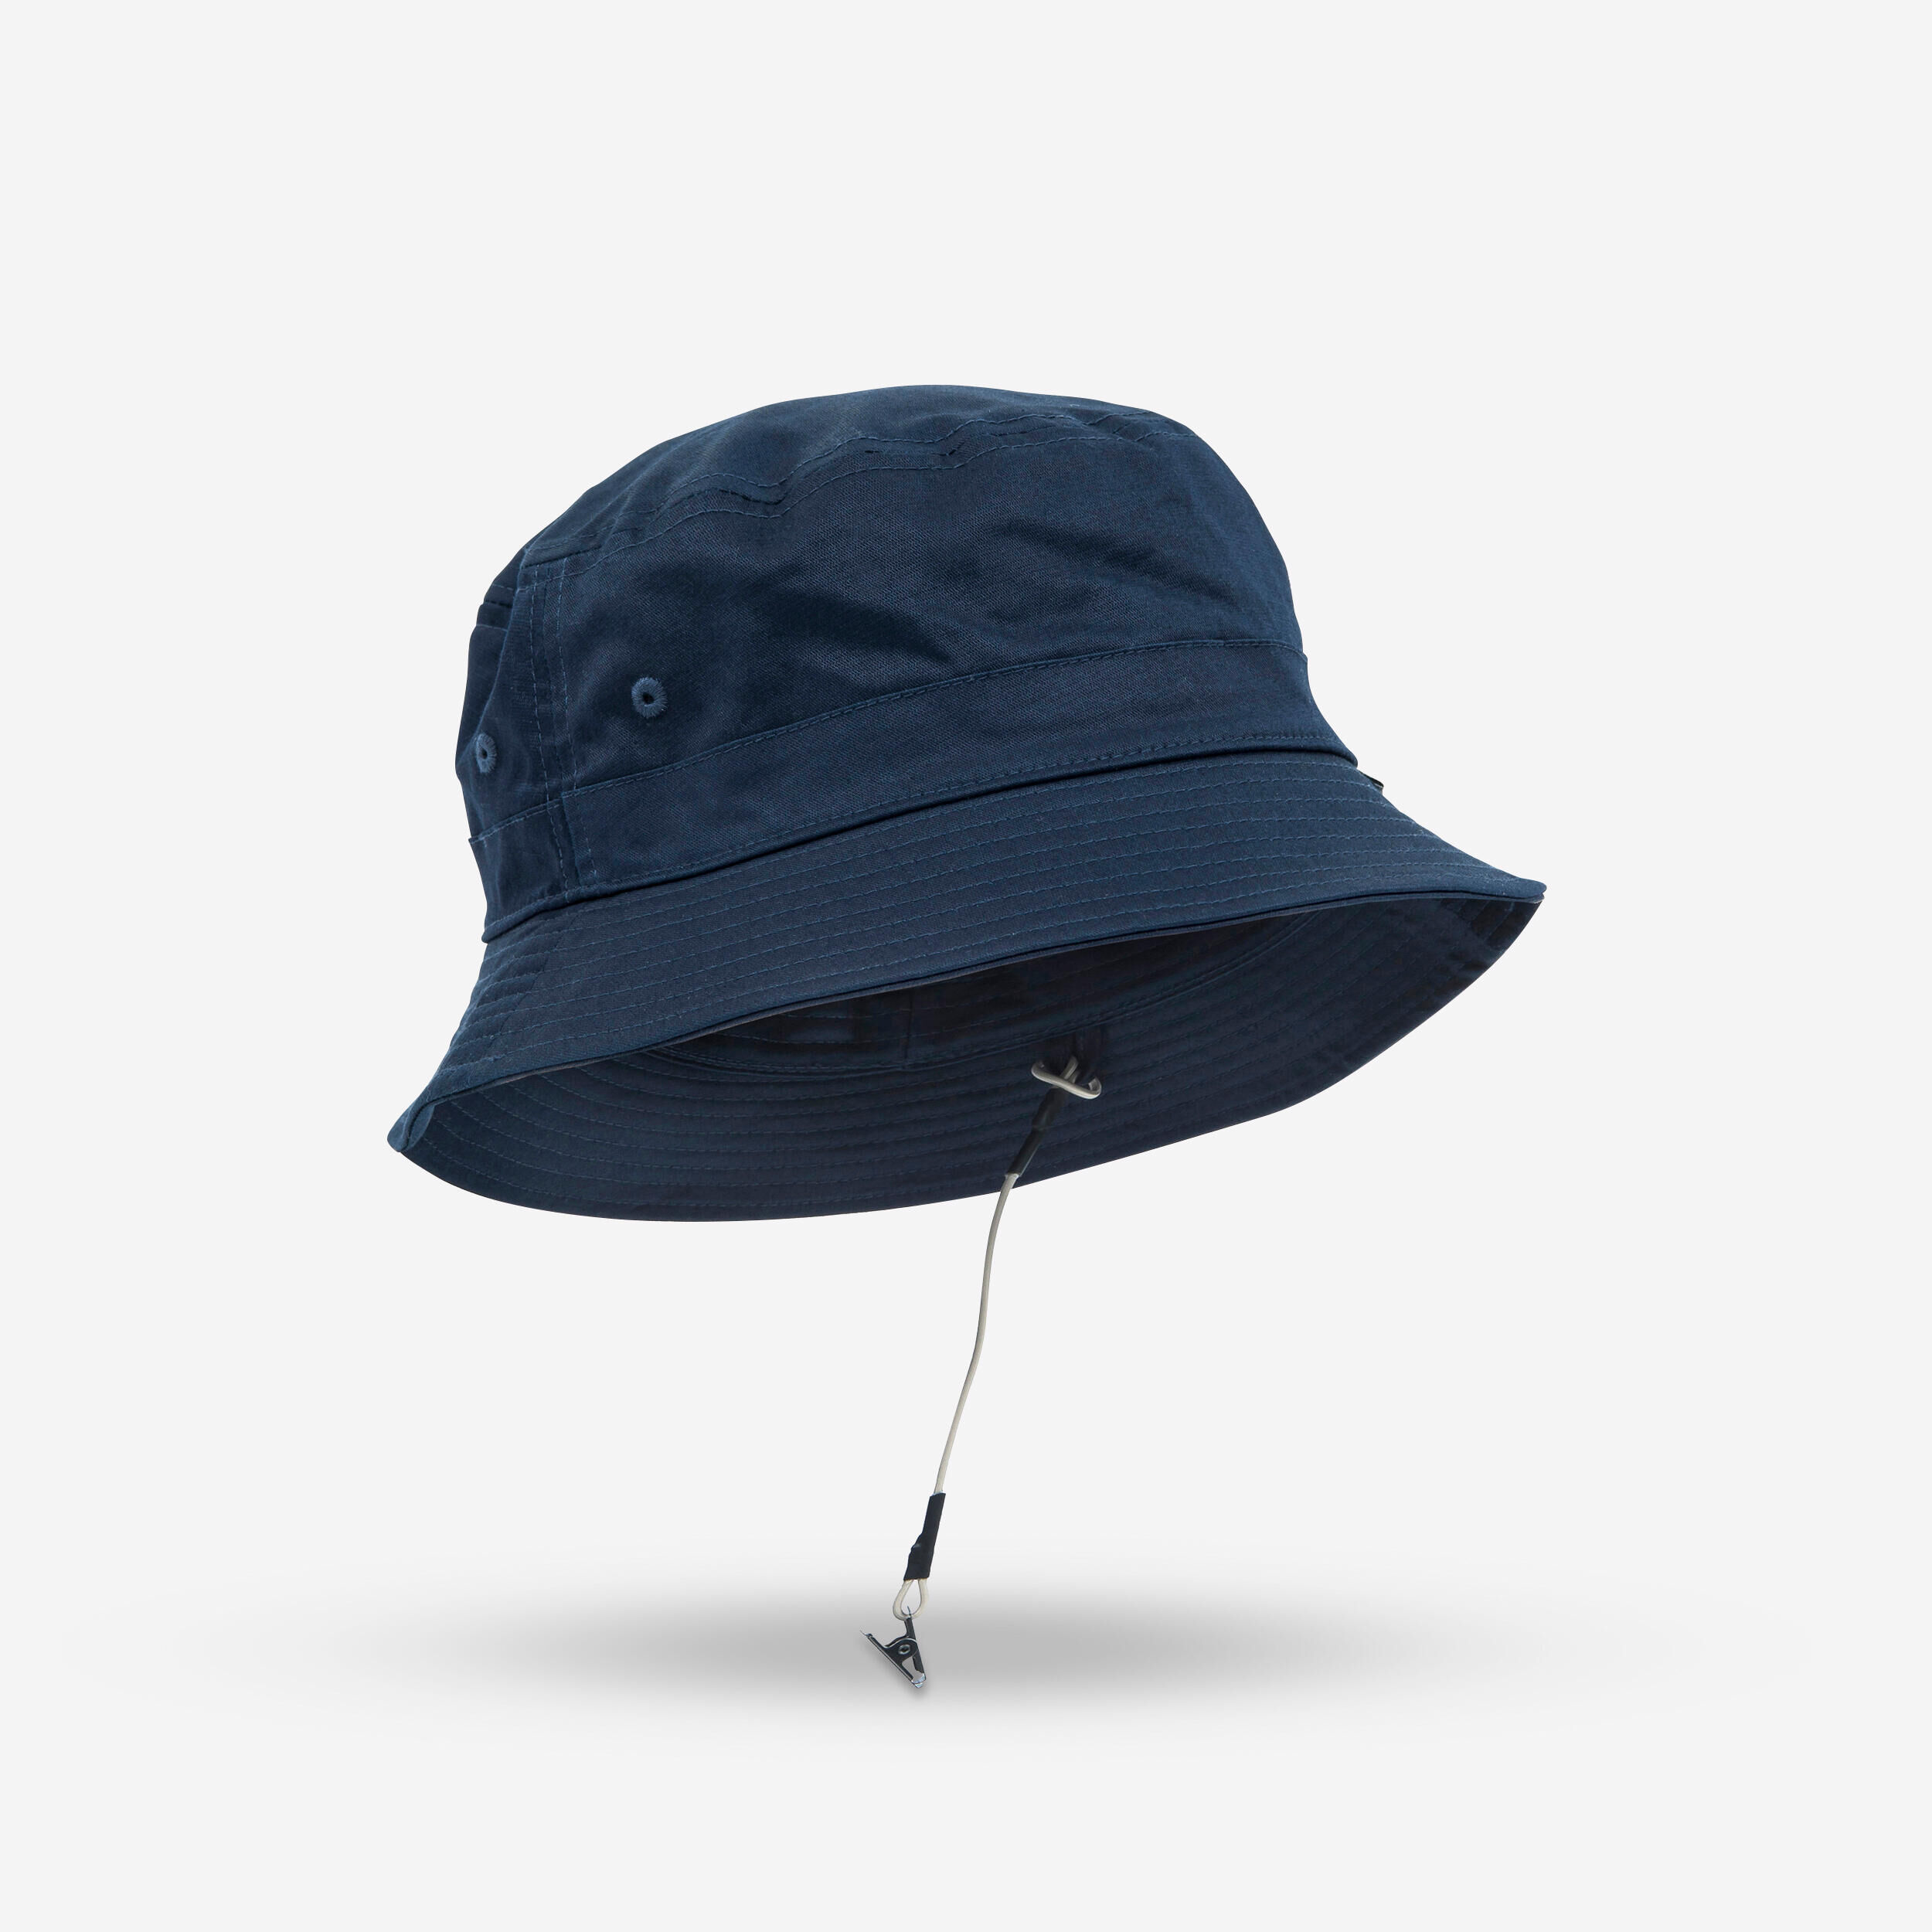 TRIBORD Adults’ Sailing boat hat 100 - Navy blue cotton